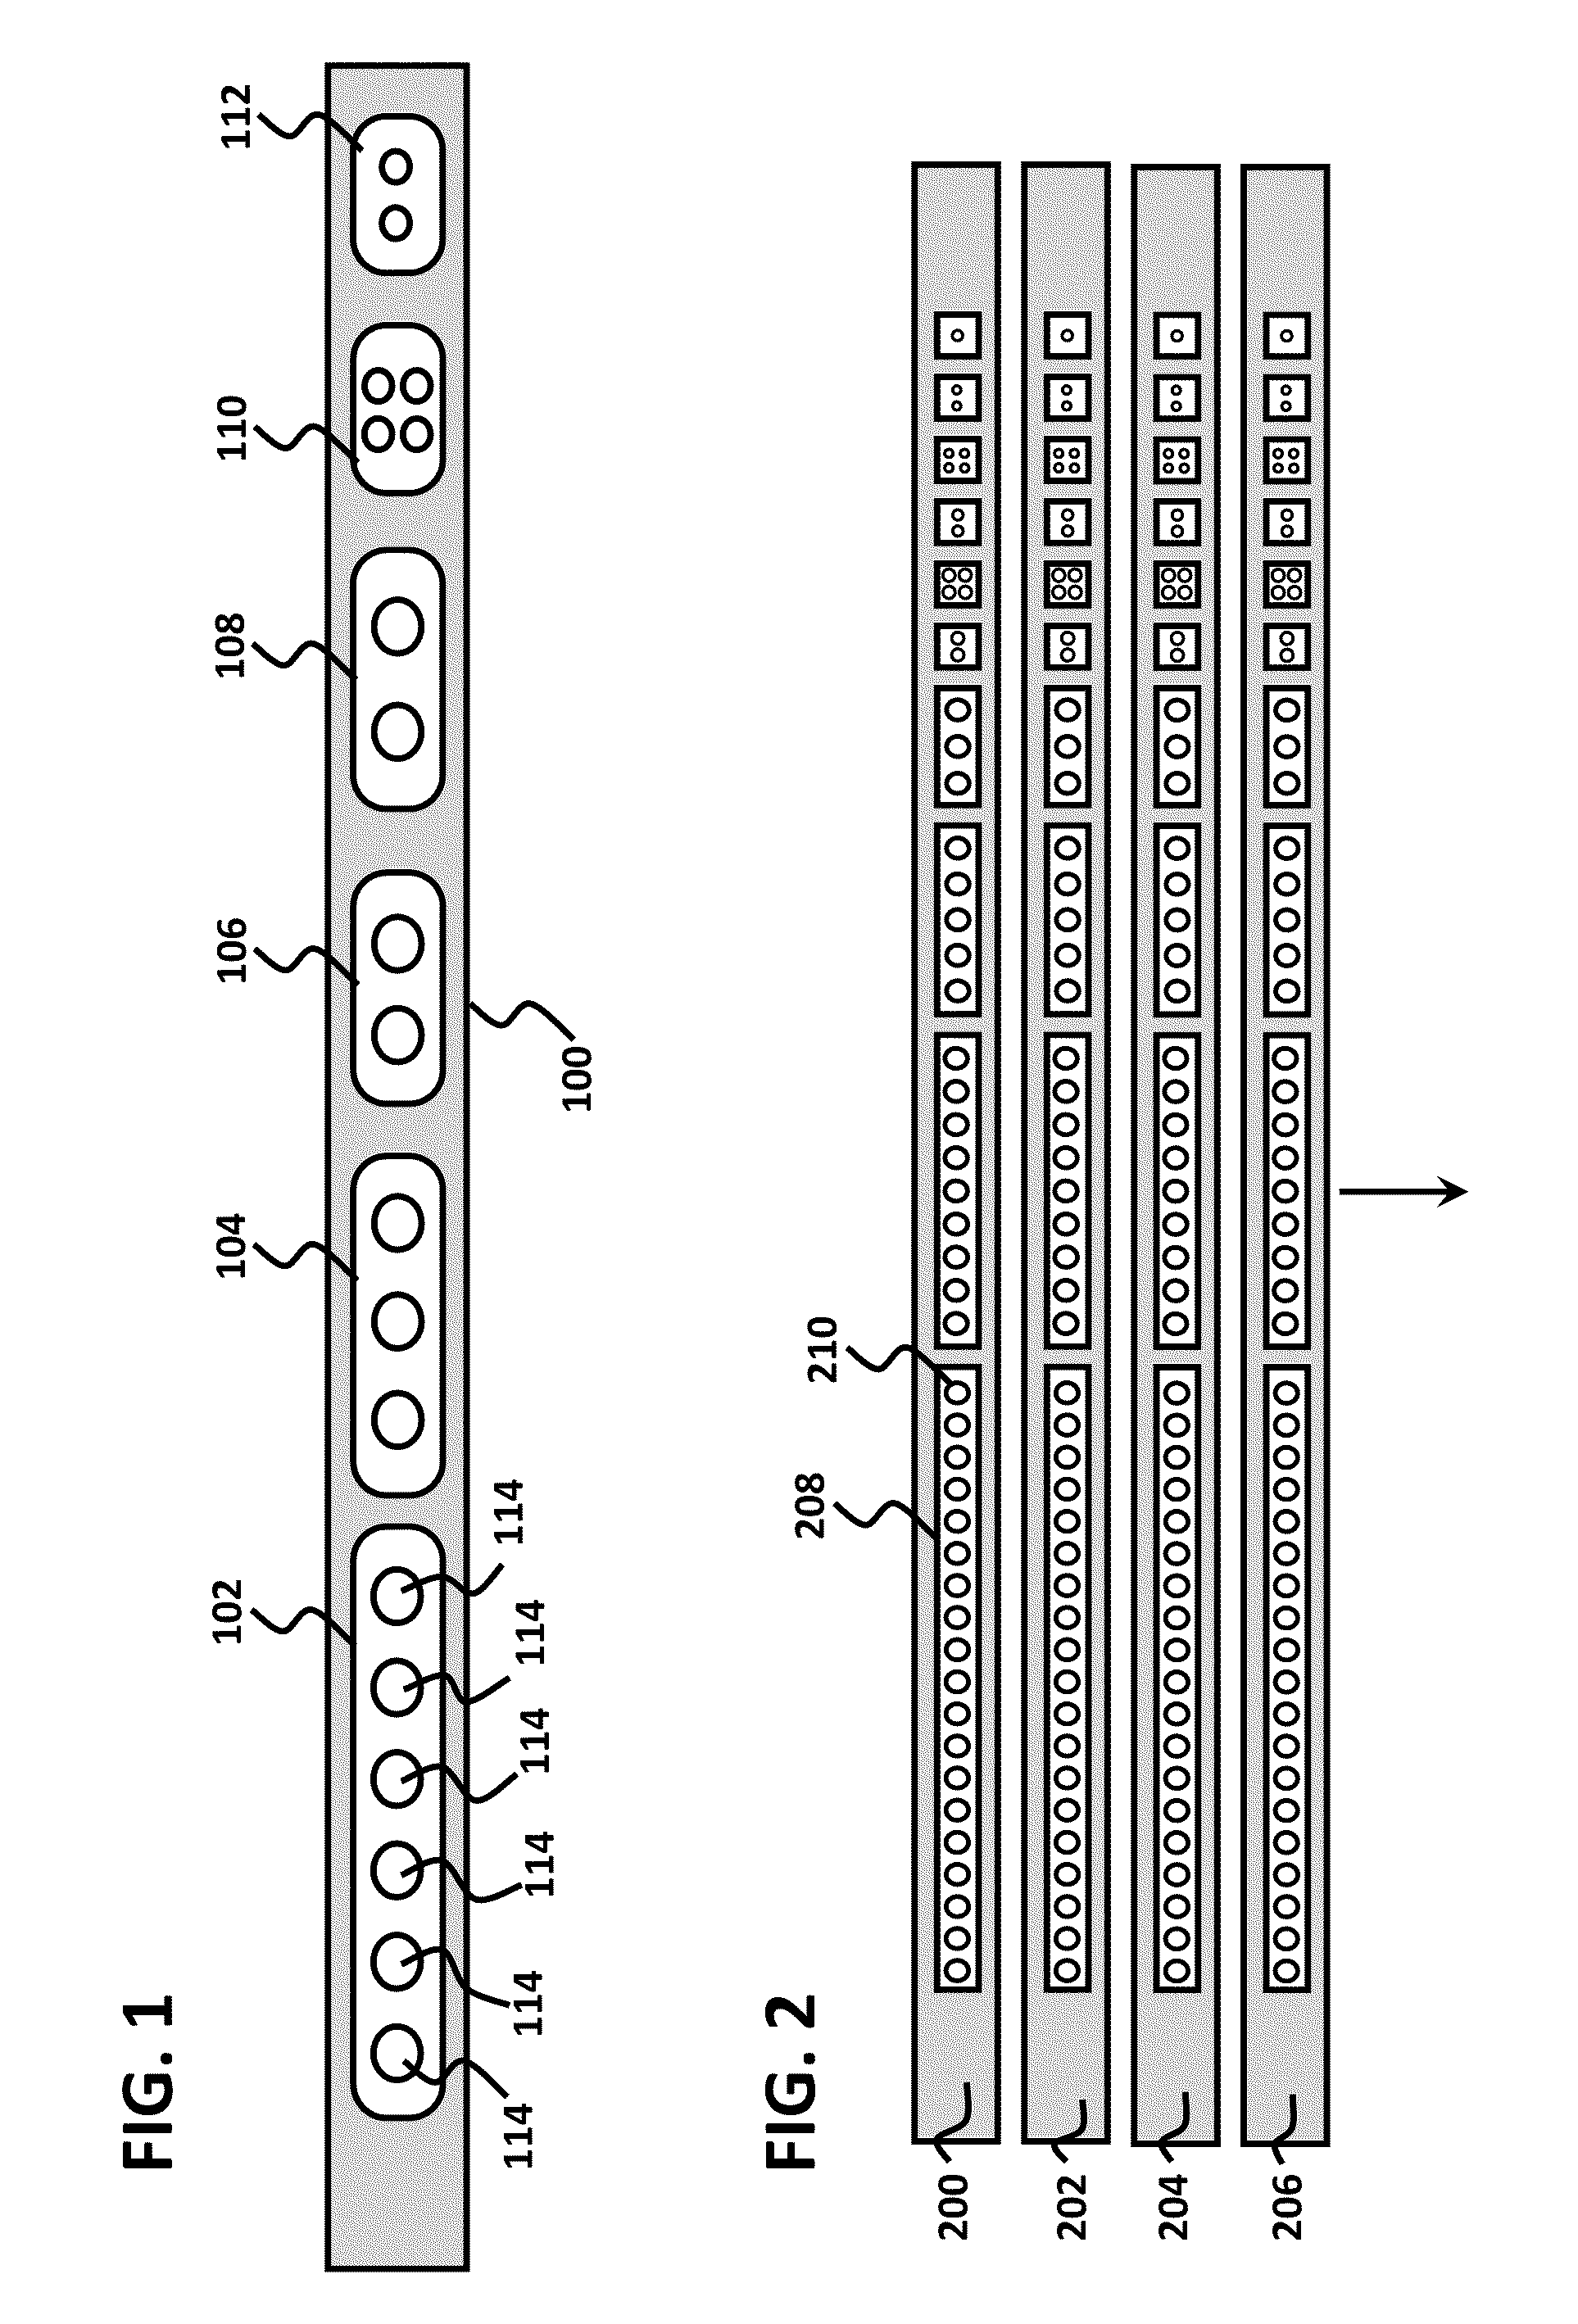 System and method for combining laser arrays for digital outputs